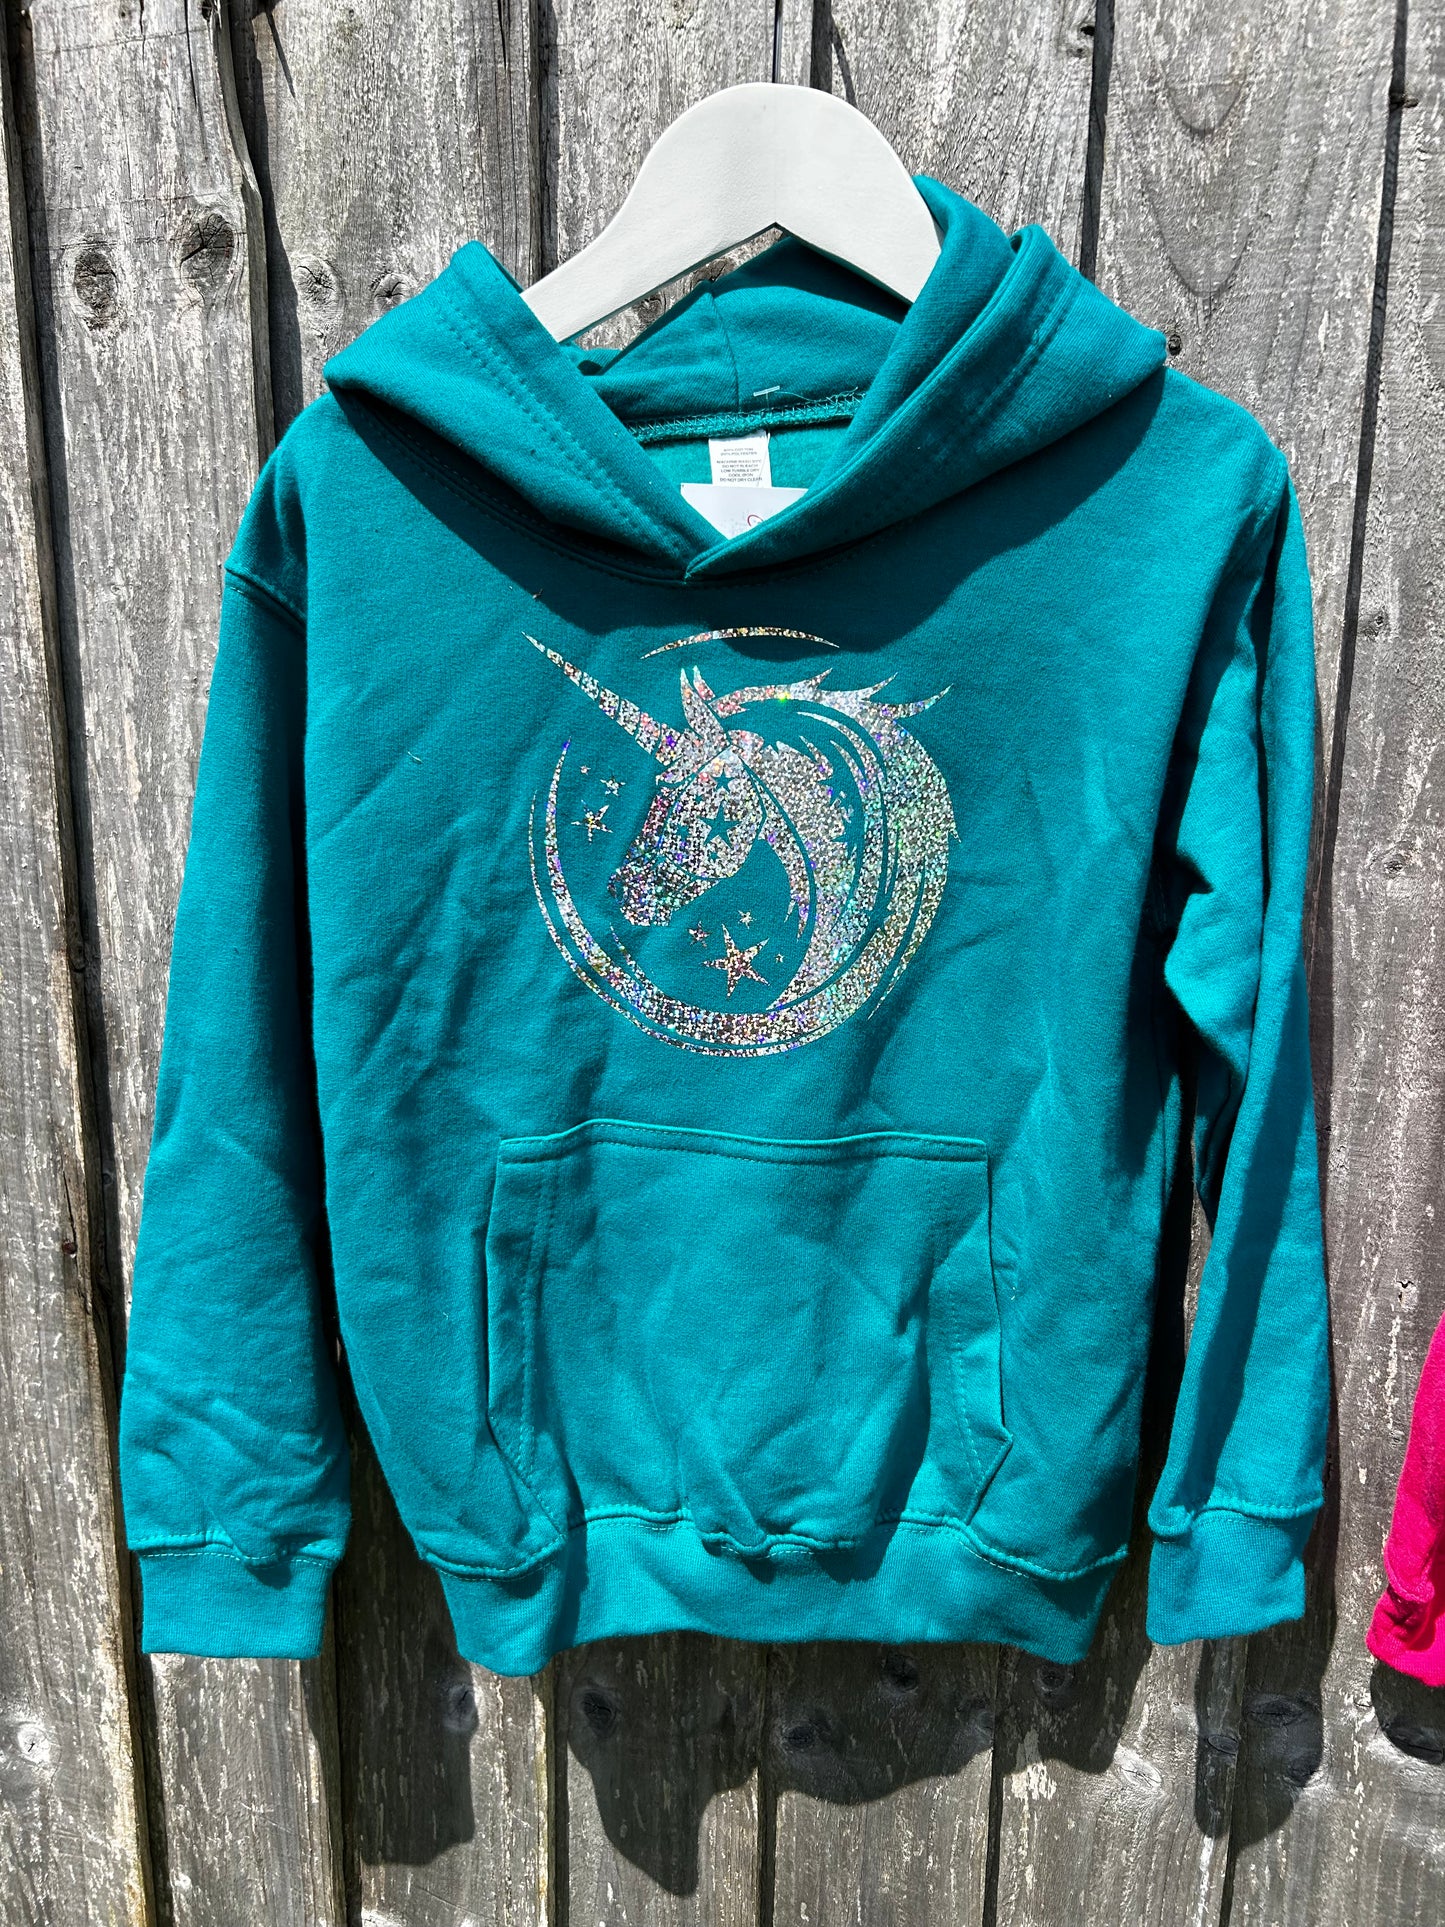 Clothing Clearance - Childrens Hoodies & T Shirts - Limited Stock!